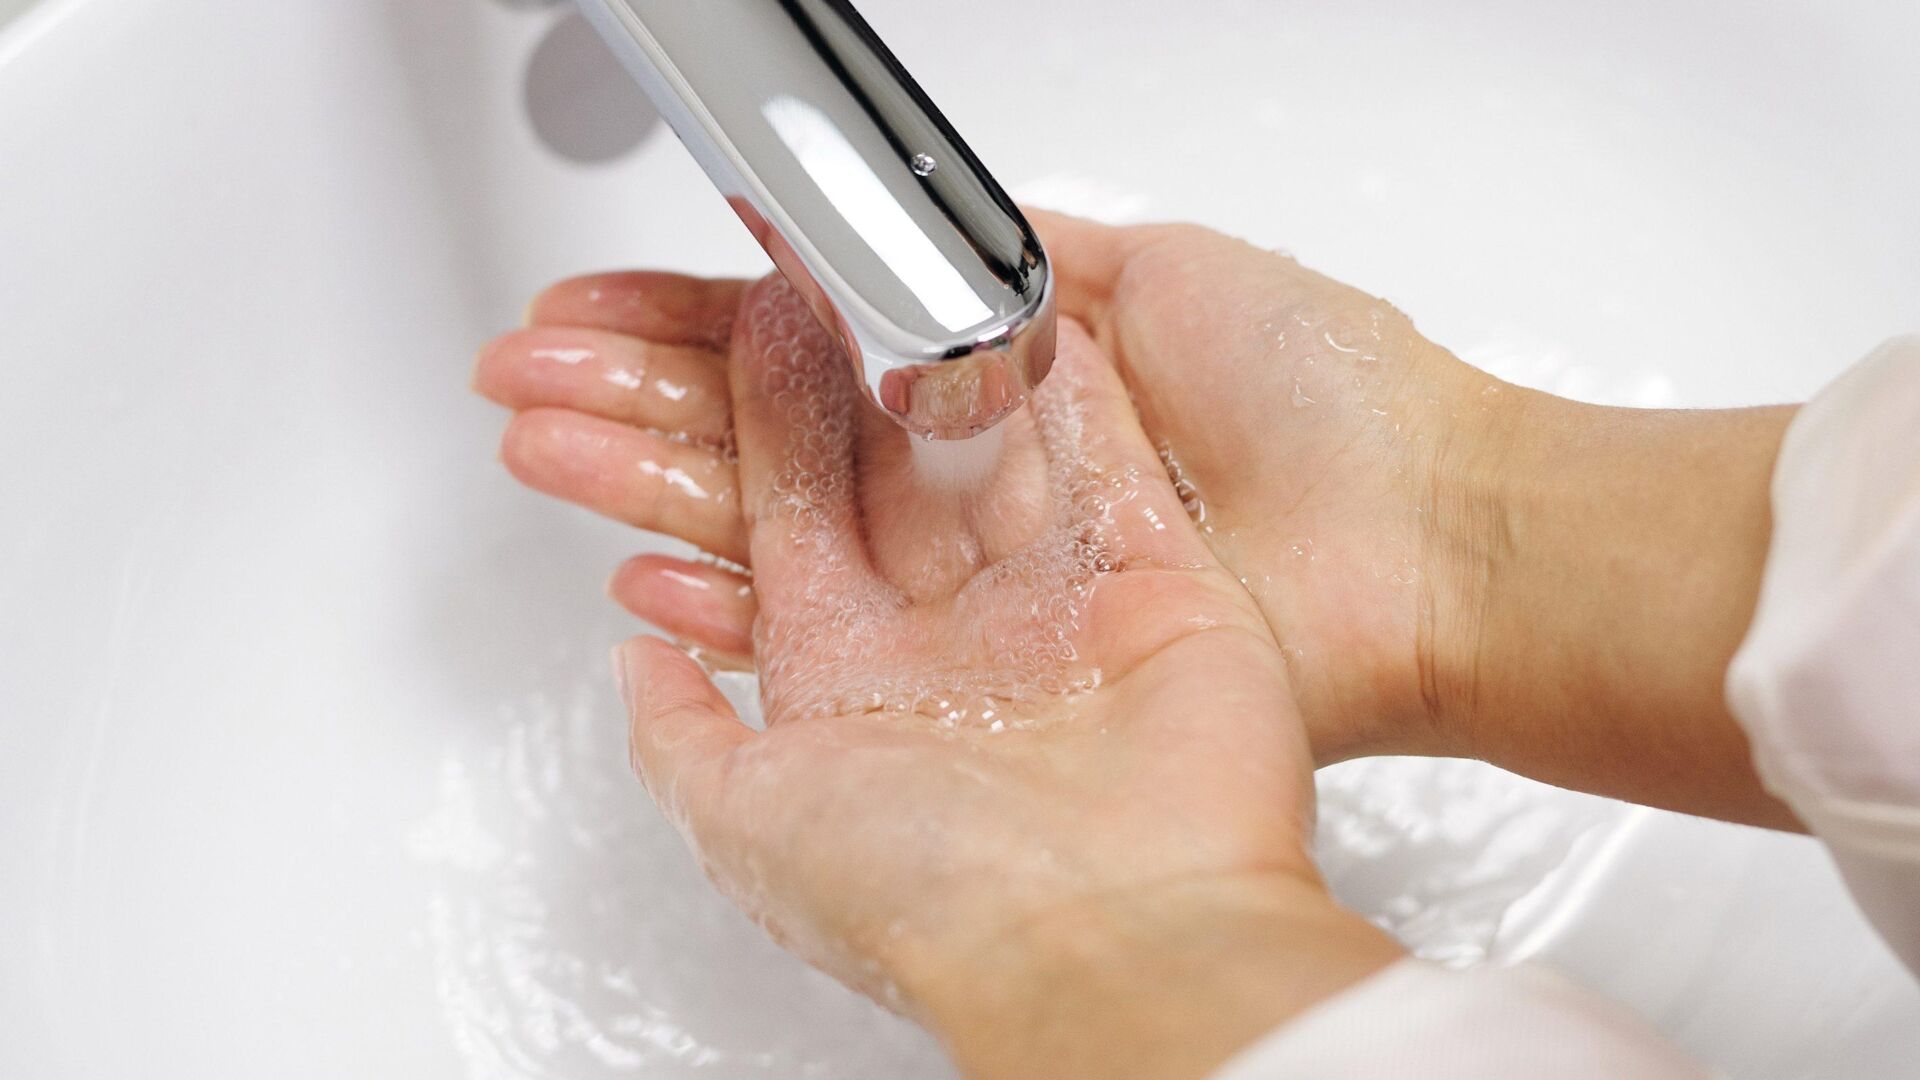 Woman washing her hands with soap 4031825